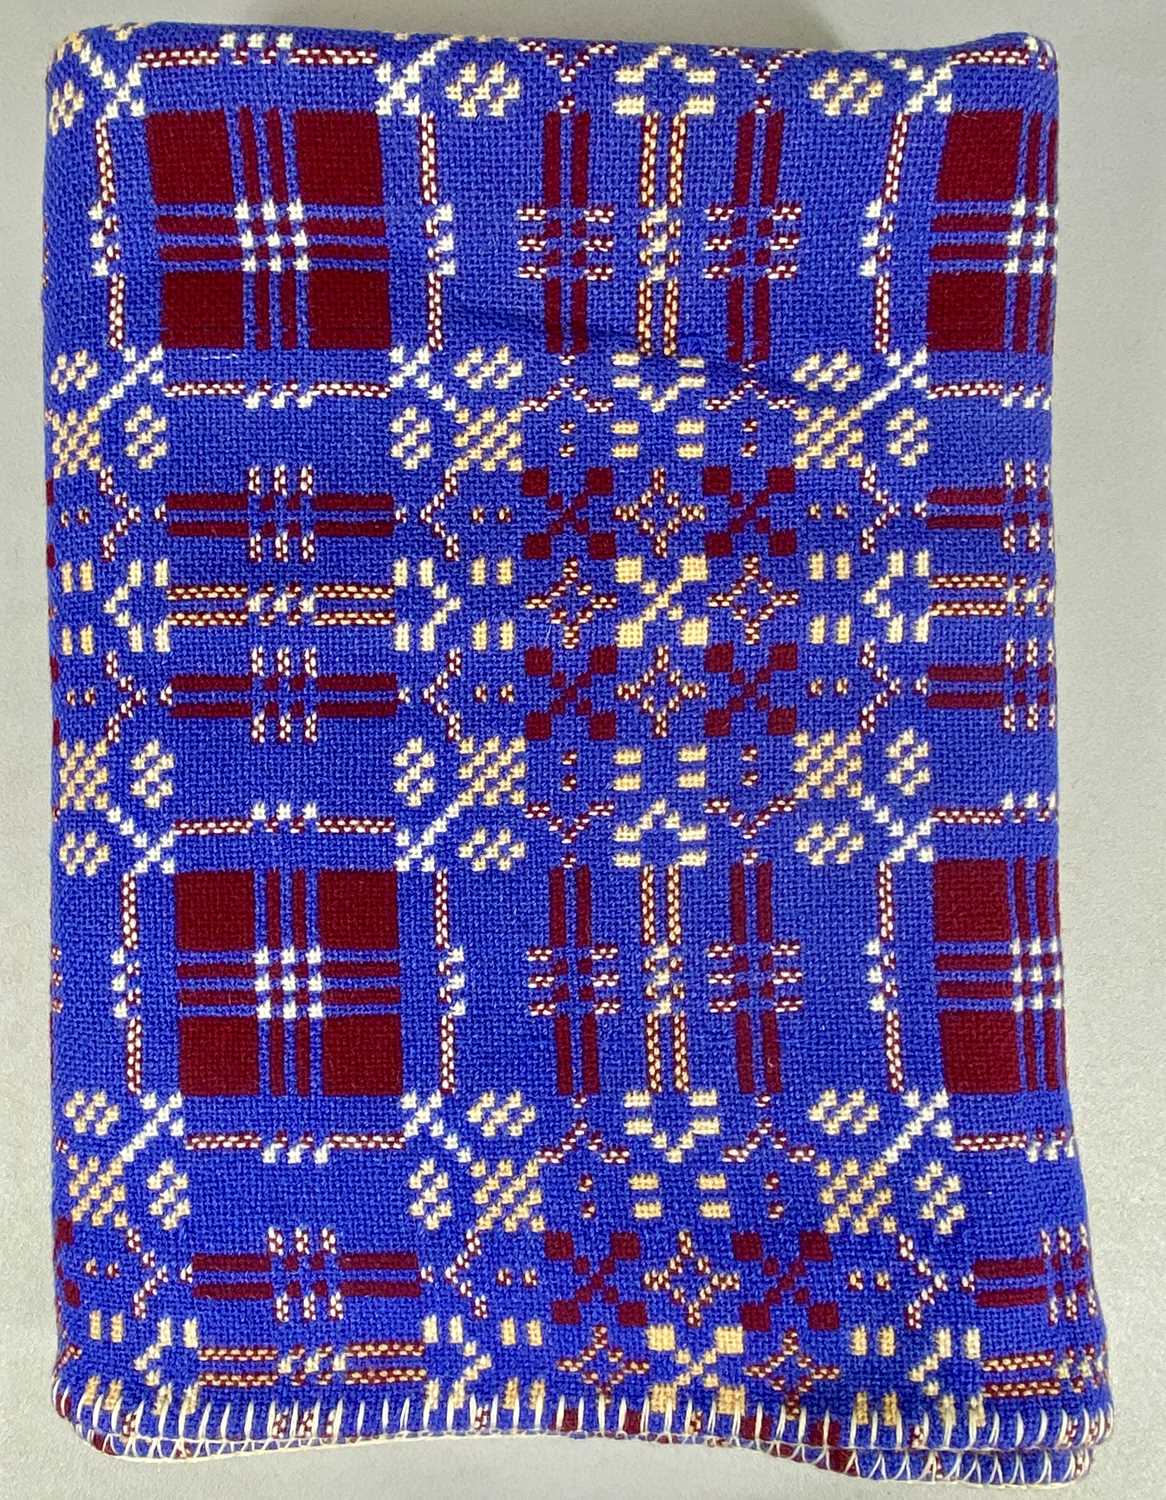 VINTAGE HOLYTEX PURE VIRGIN WOOL WELSH BLANKET, blue, purple, cream double sided, approx. 188 x - Image 2 of 5